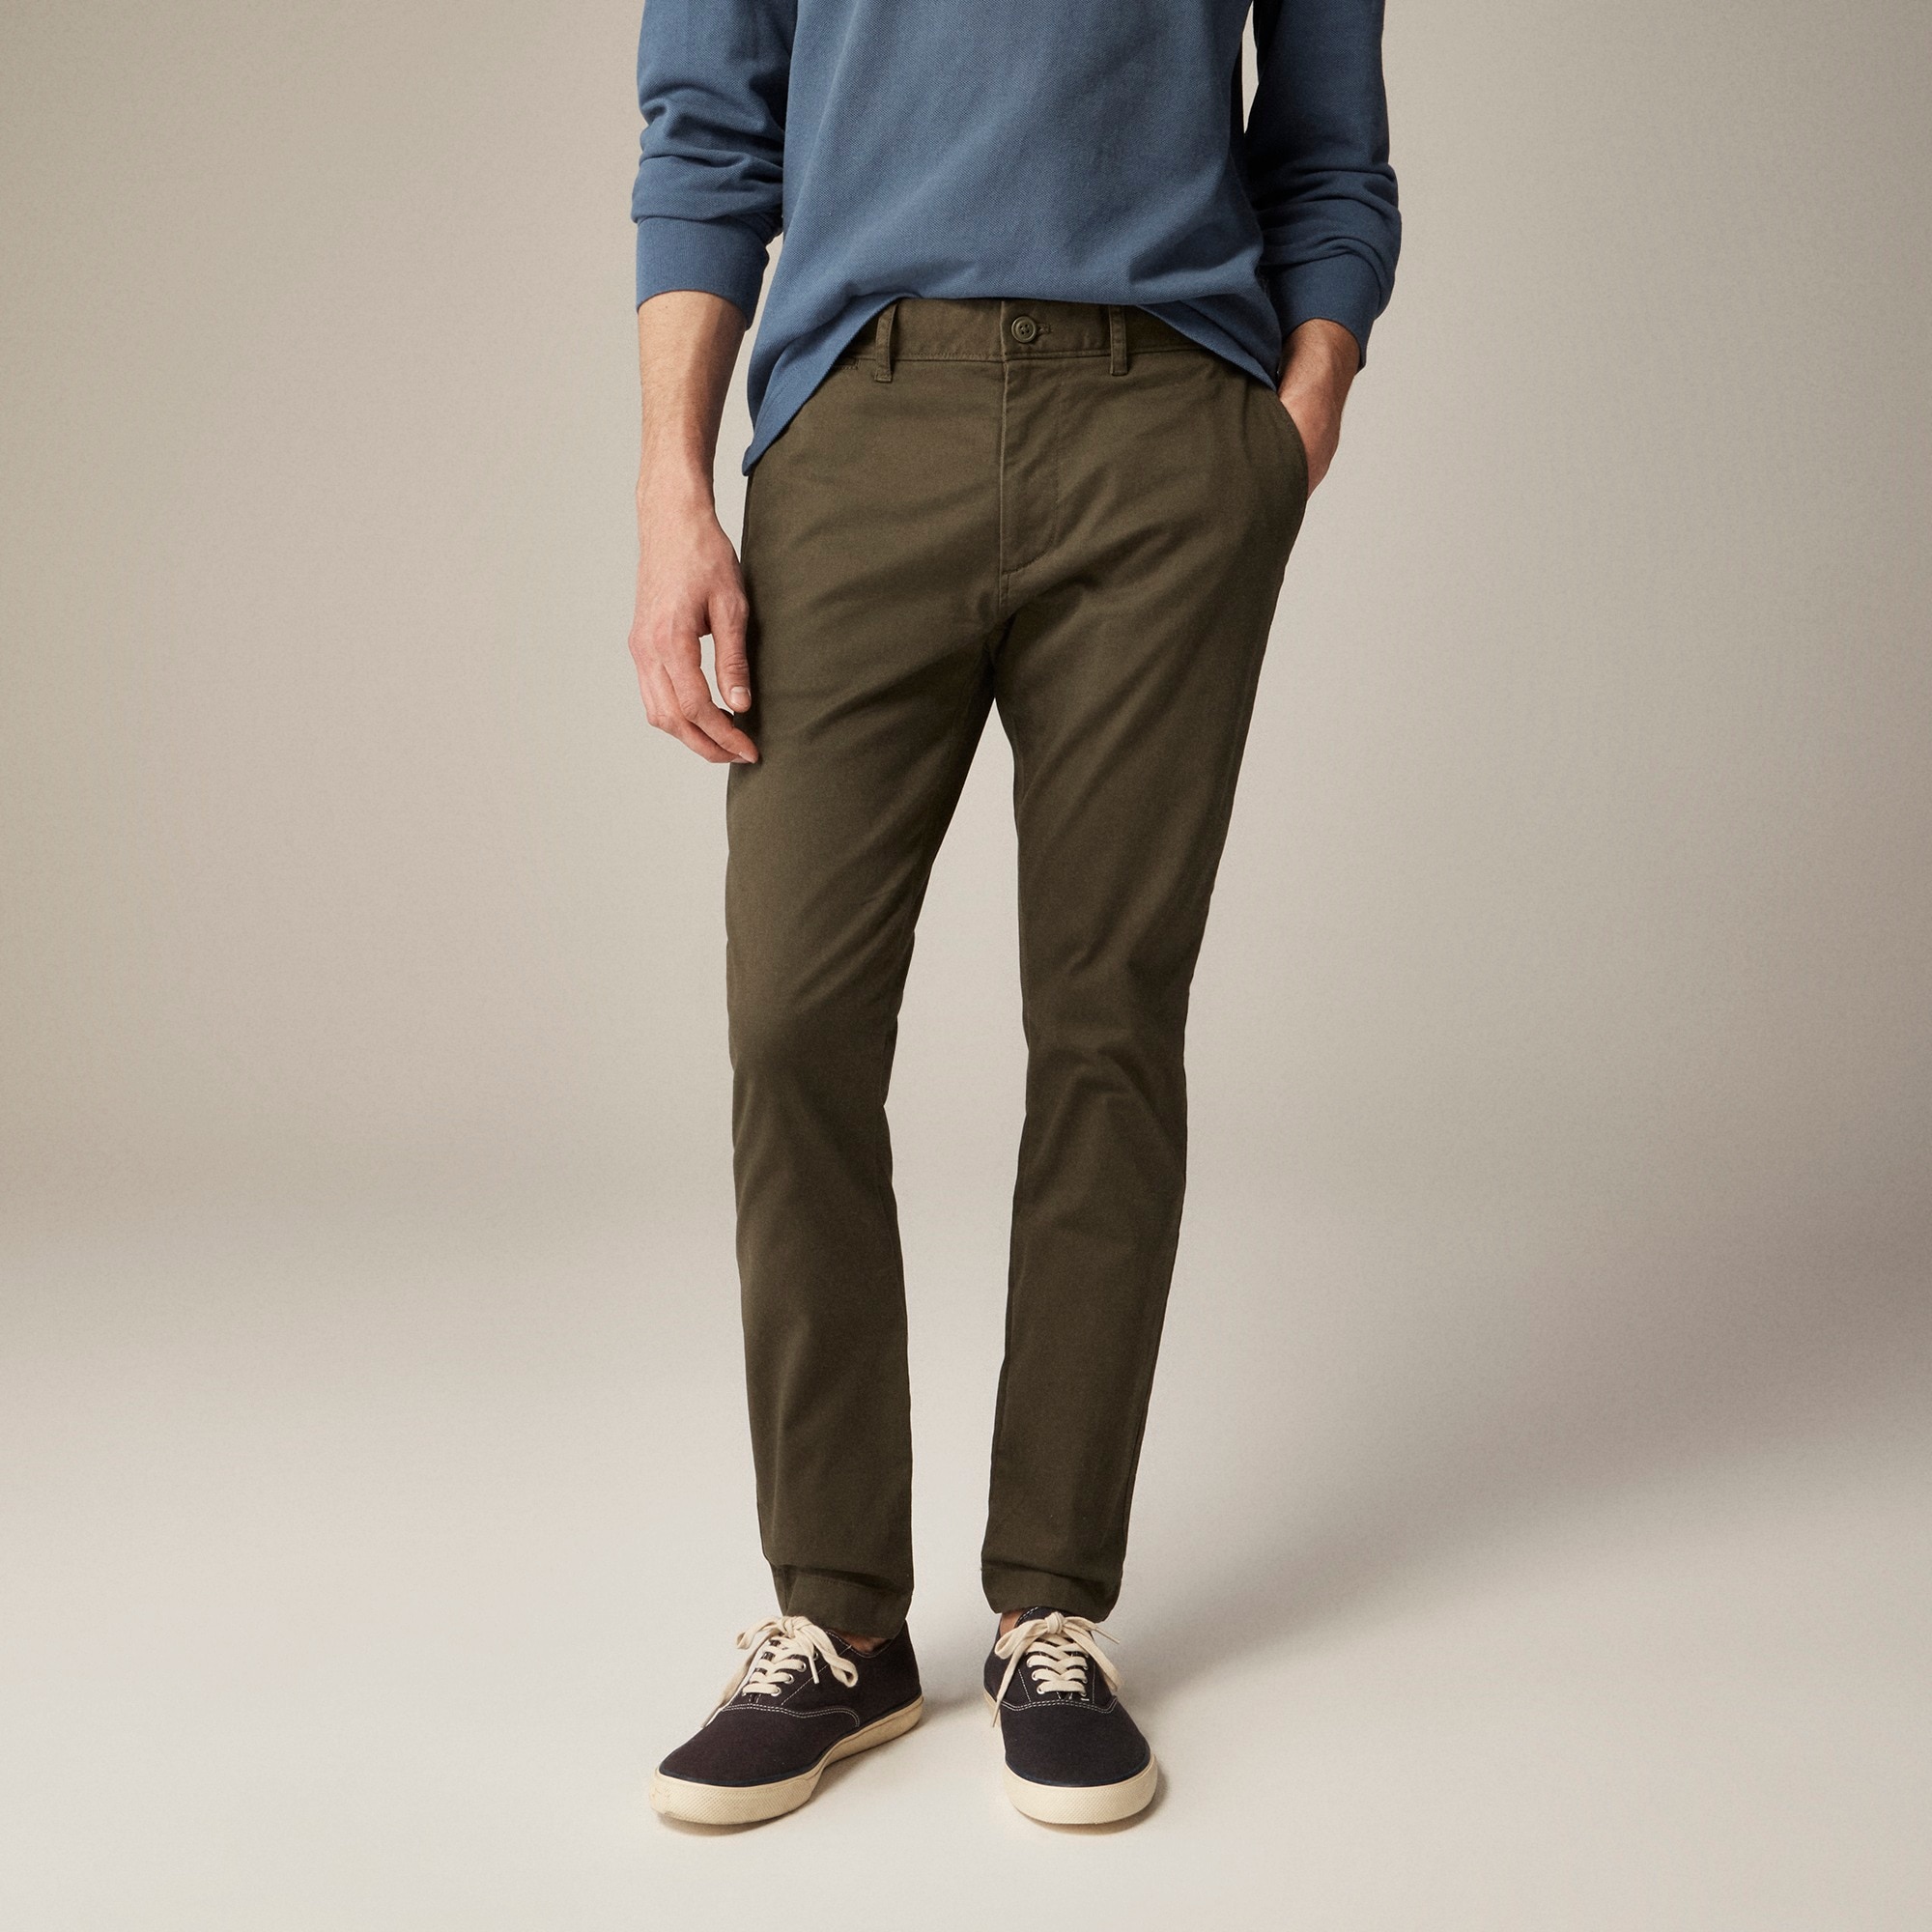 Jcrew 250 skinny-fit pant in stretch chino